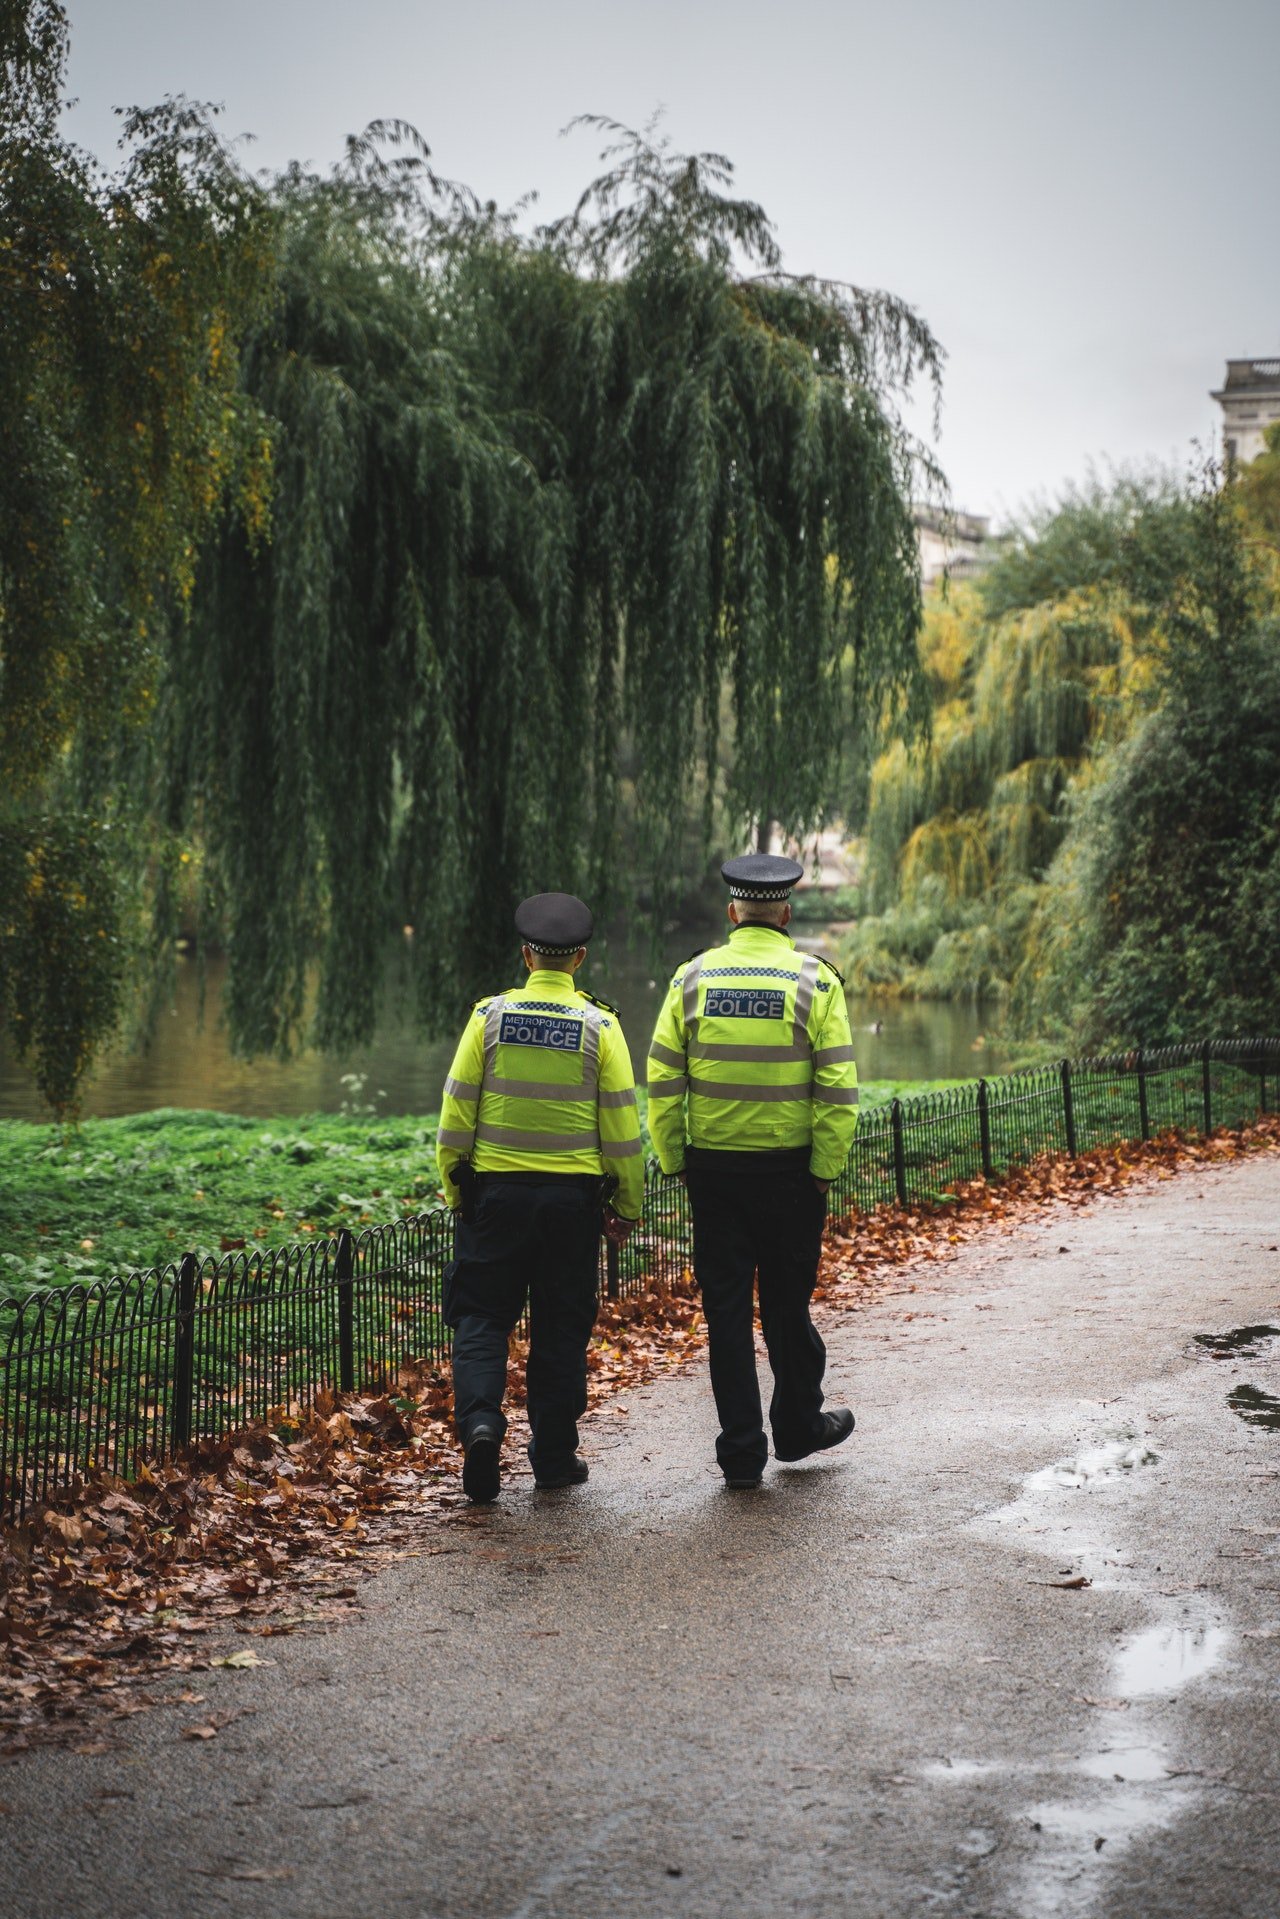 Two police officers walking on the road | Photo: Pexels